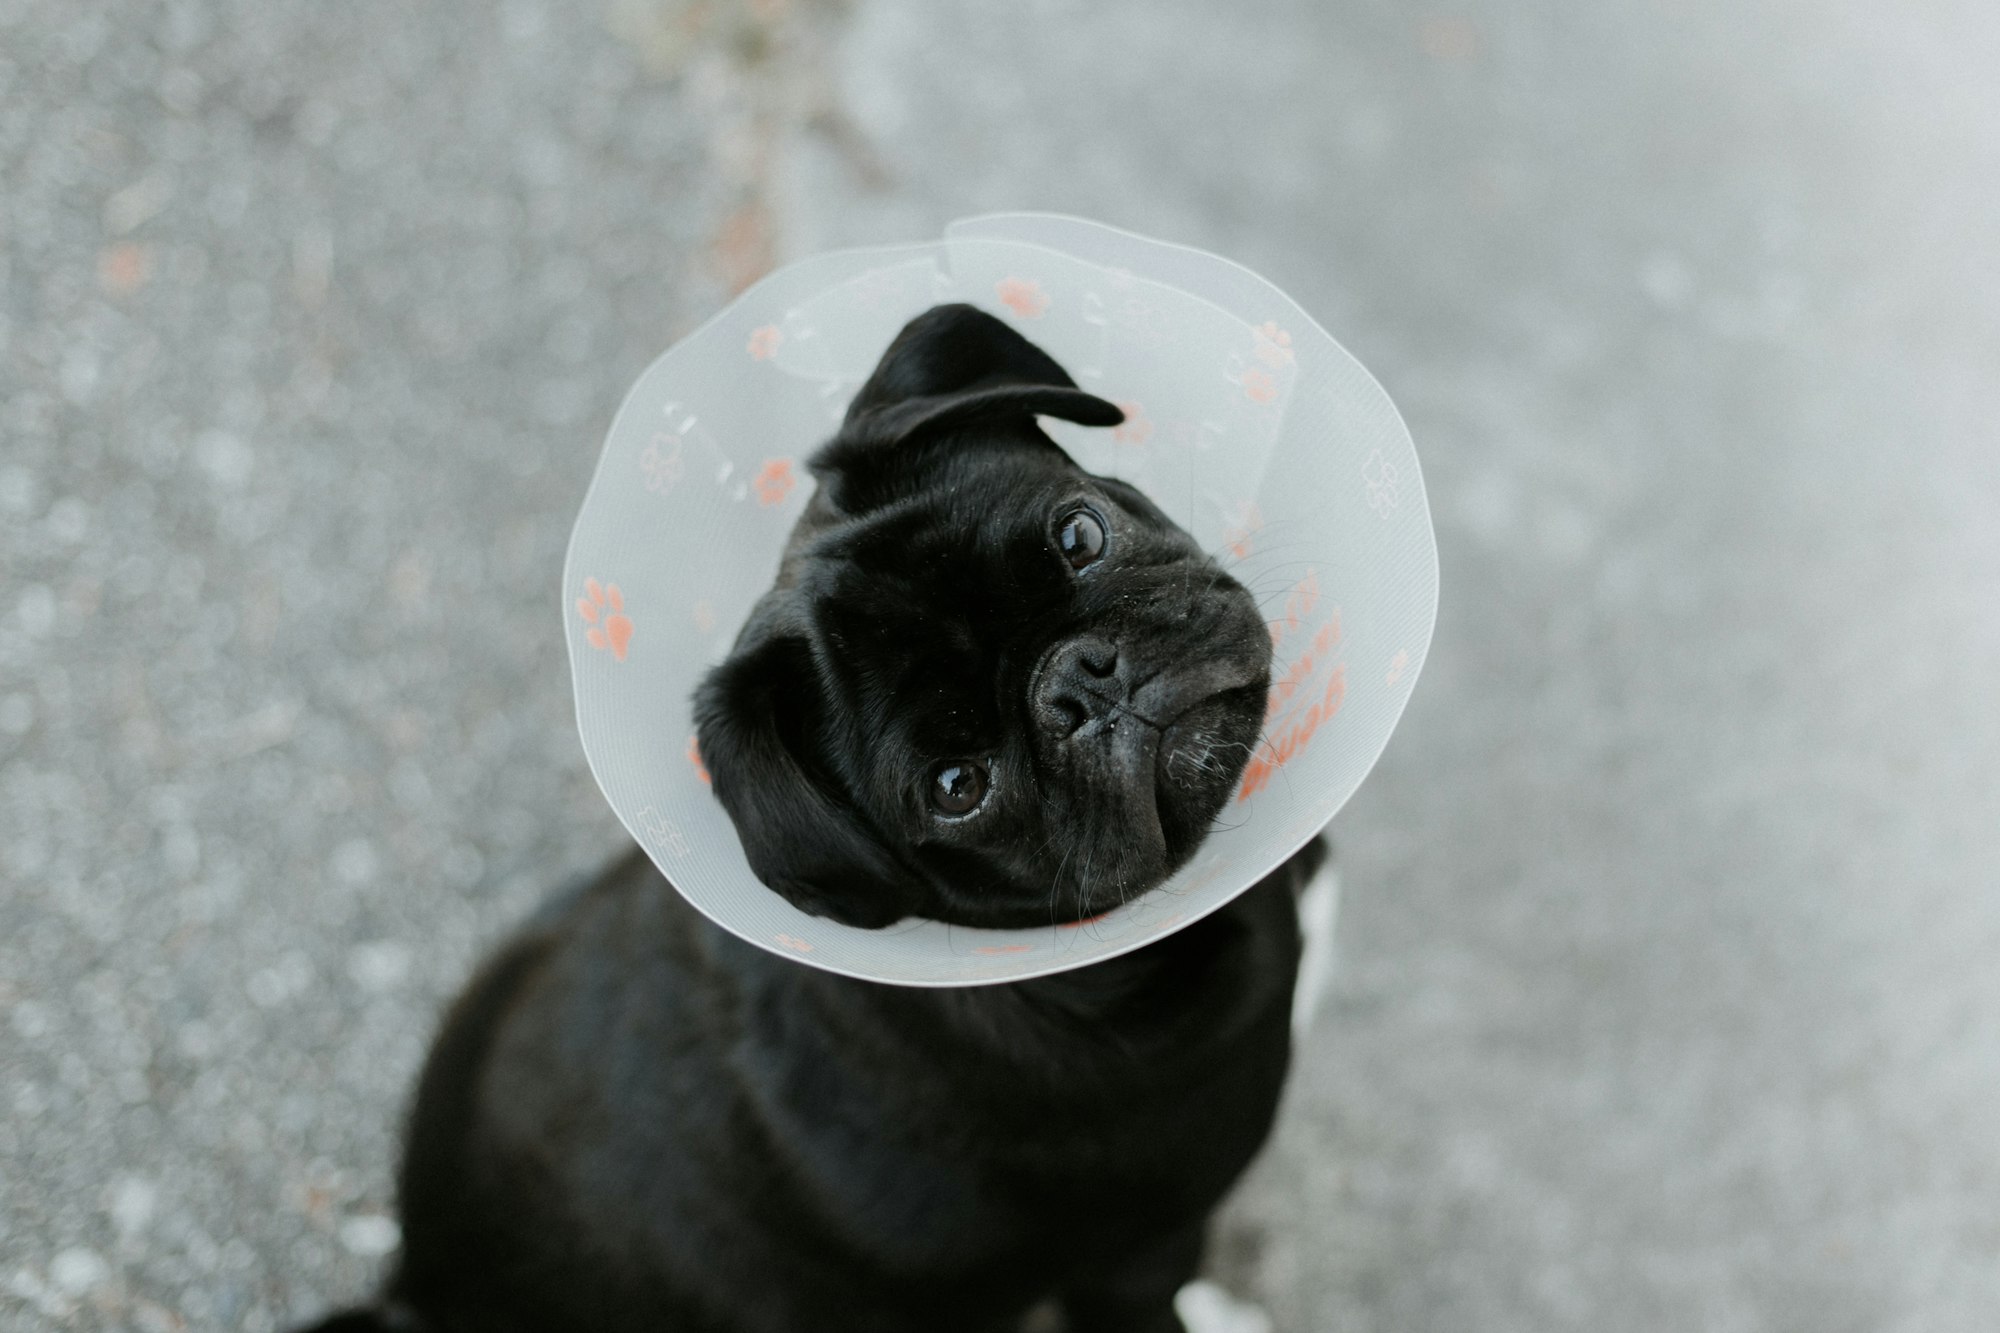 How to Put an Elizabethan Collar on a Dog